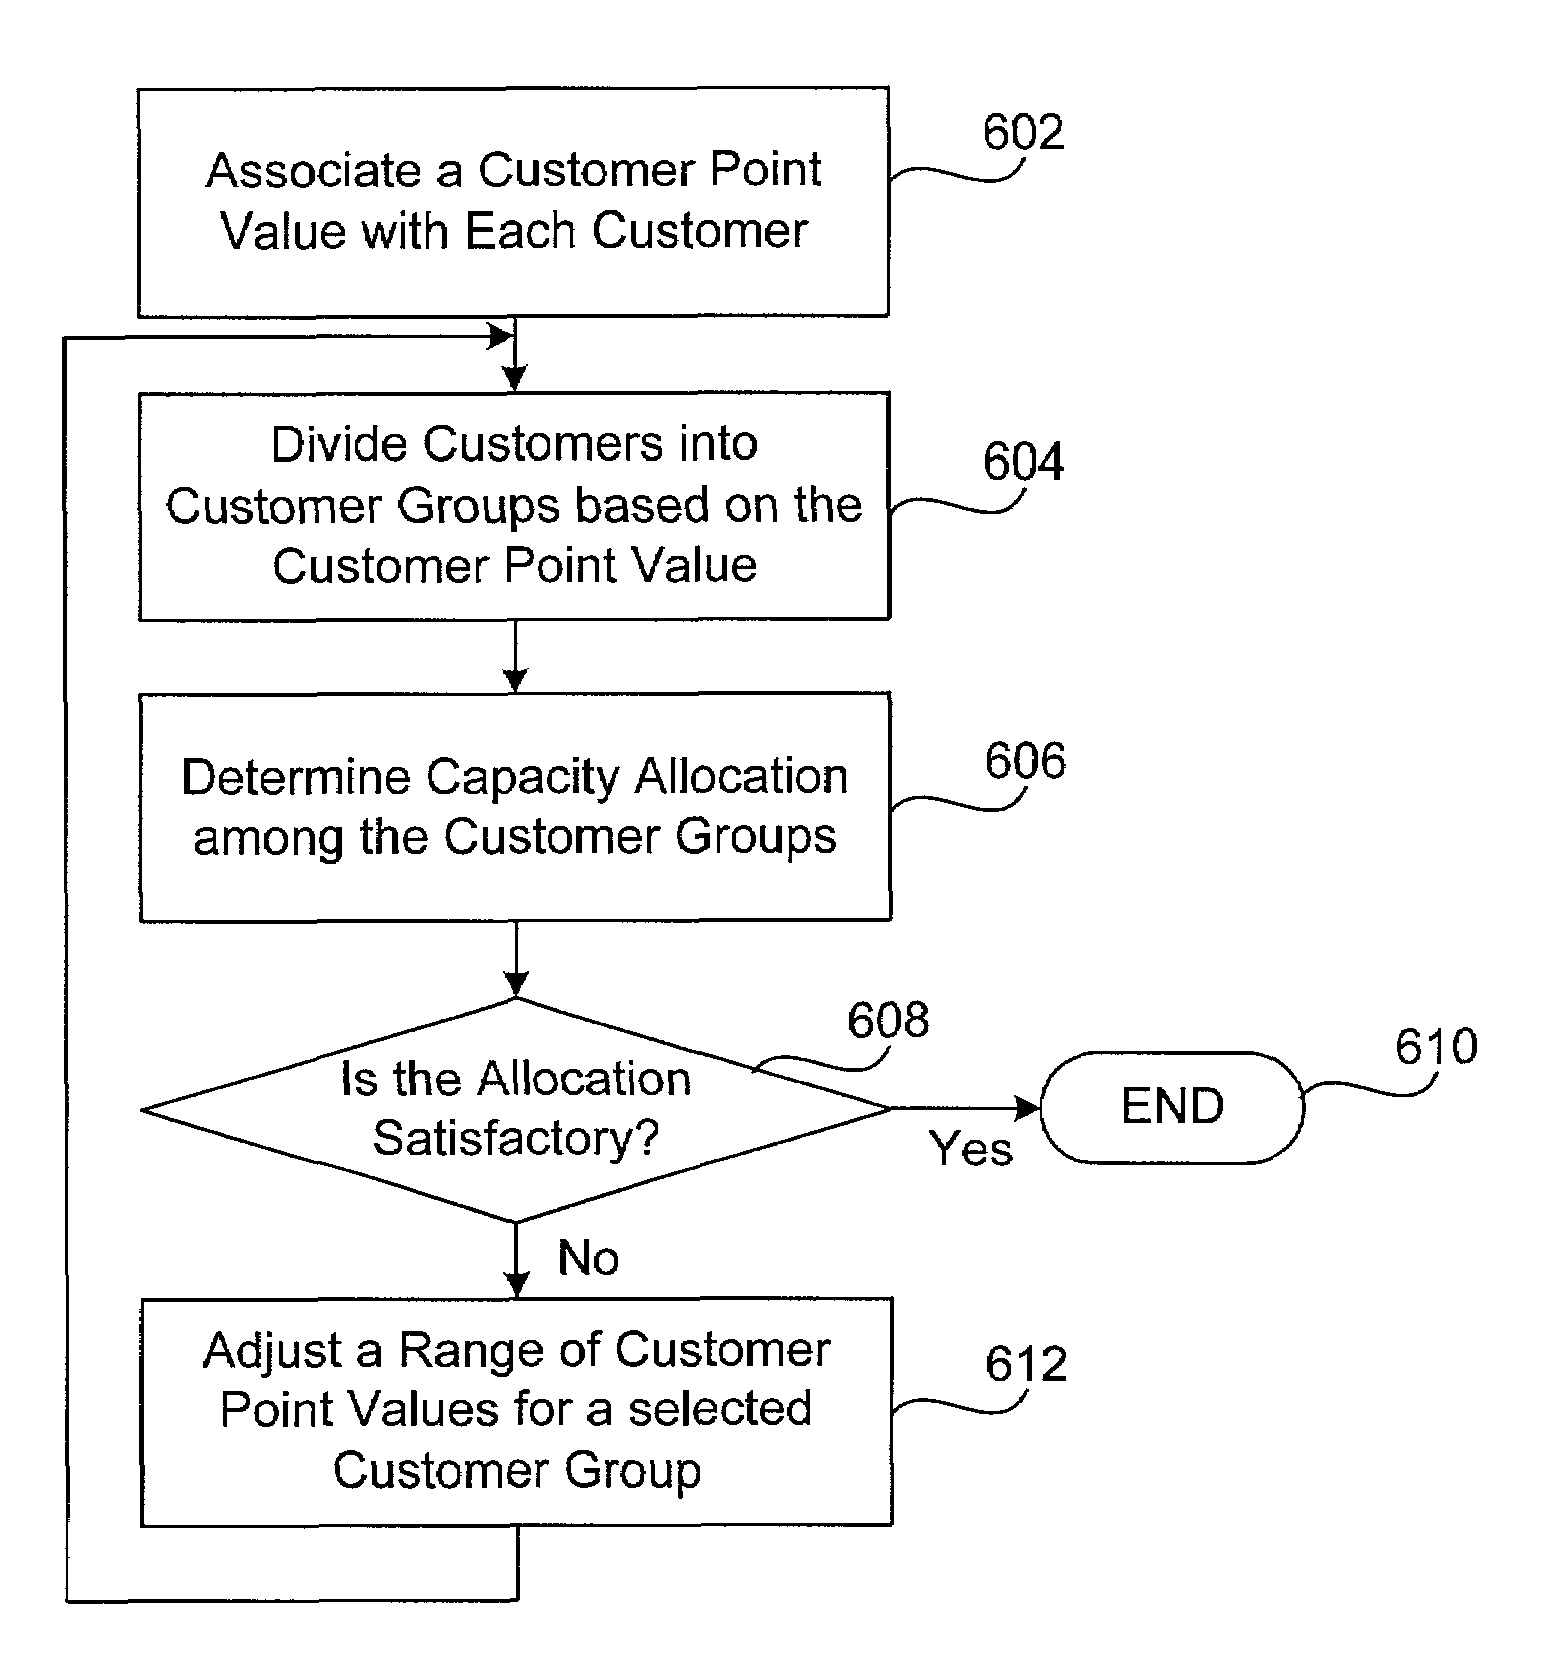 Scheduling delivery of products via the internet